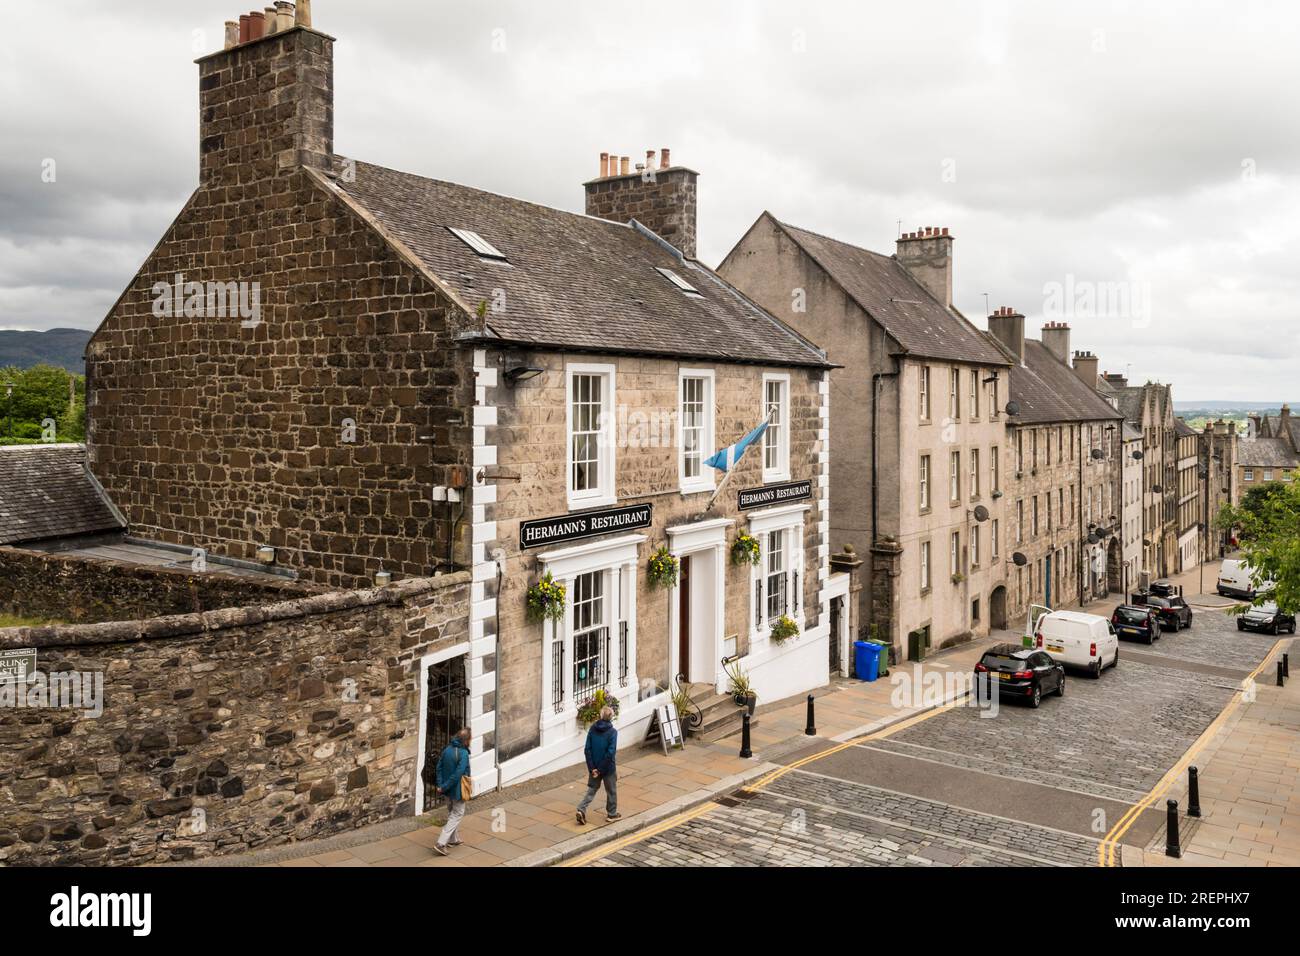 Broad Street in the old town area of Stirling, Scotland. Stock Photo